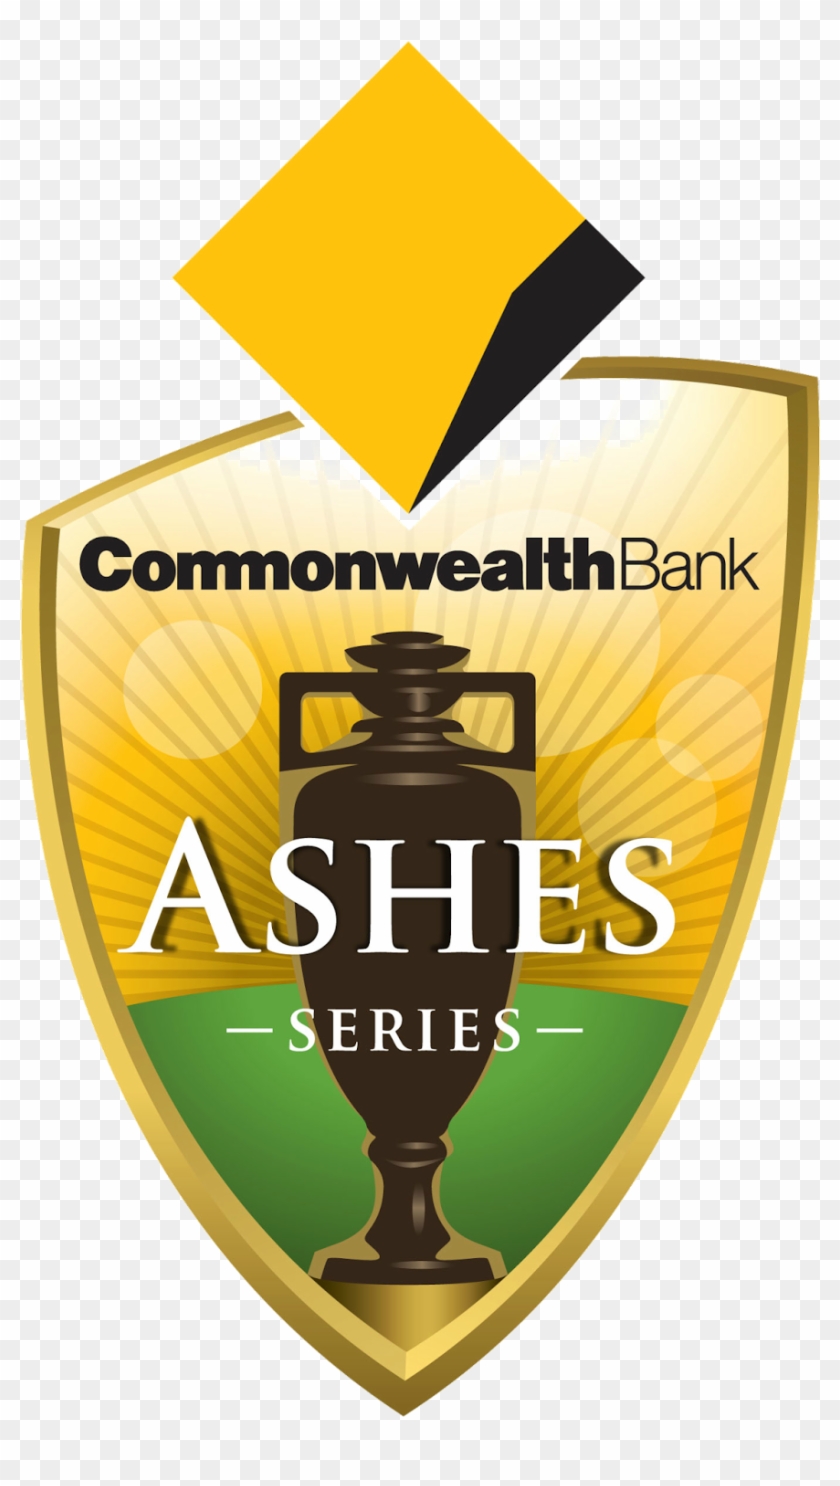 Here Comes, Commonwealth Bank Ashes 2013 Patch For - Commonwealth Bank Test Series Clipart #1729997